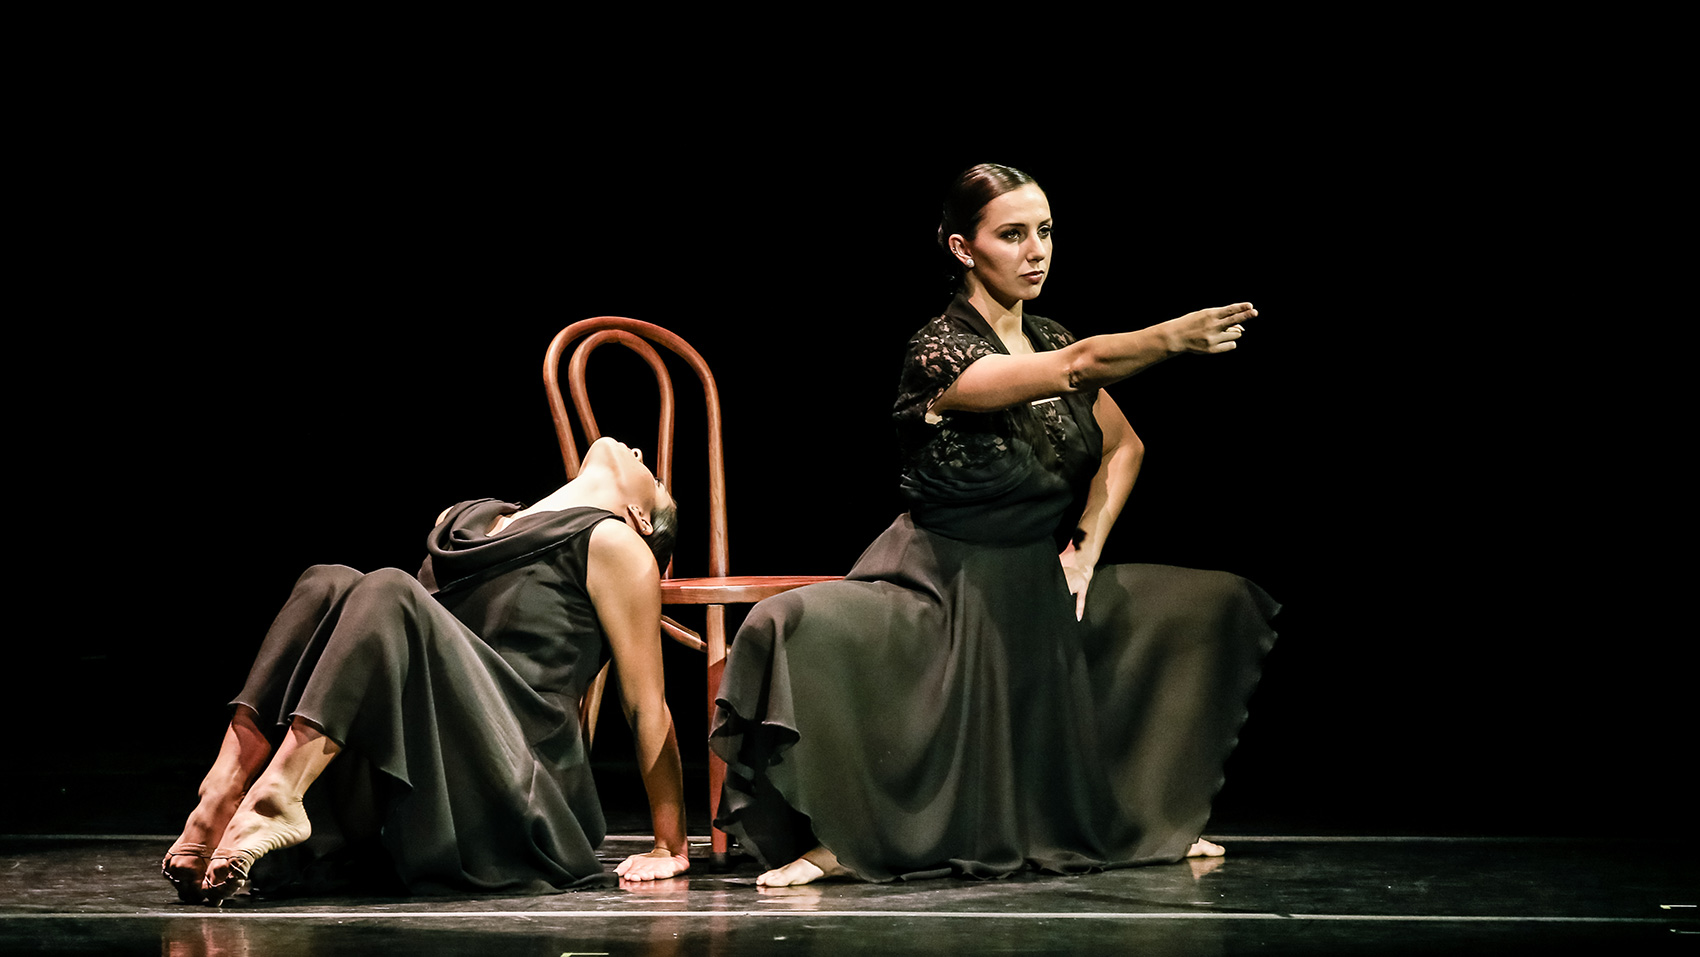 Two women dancers. One of them squats in front of a chair, one hand on her hip and the other hand stretched straight in front of her, the index finger and middle finger pointing ahead. The other woman arches her back, her face to the ceiling, her feet are pulled together with her toes on pointe.